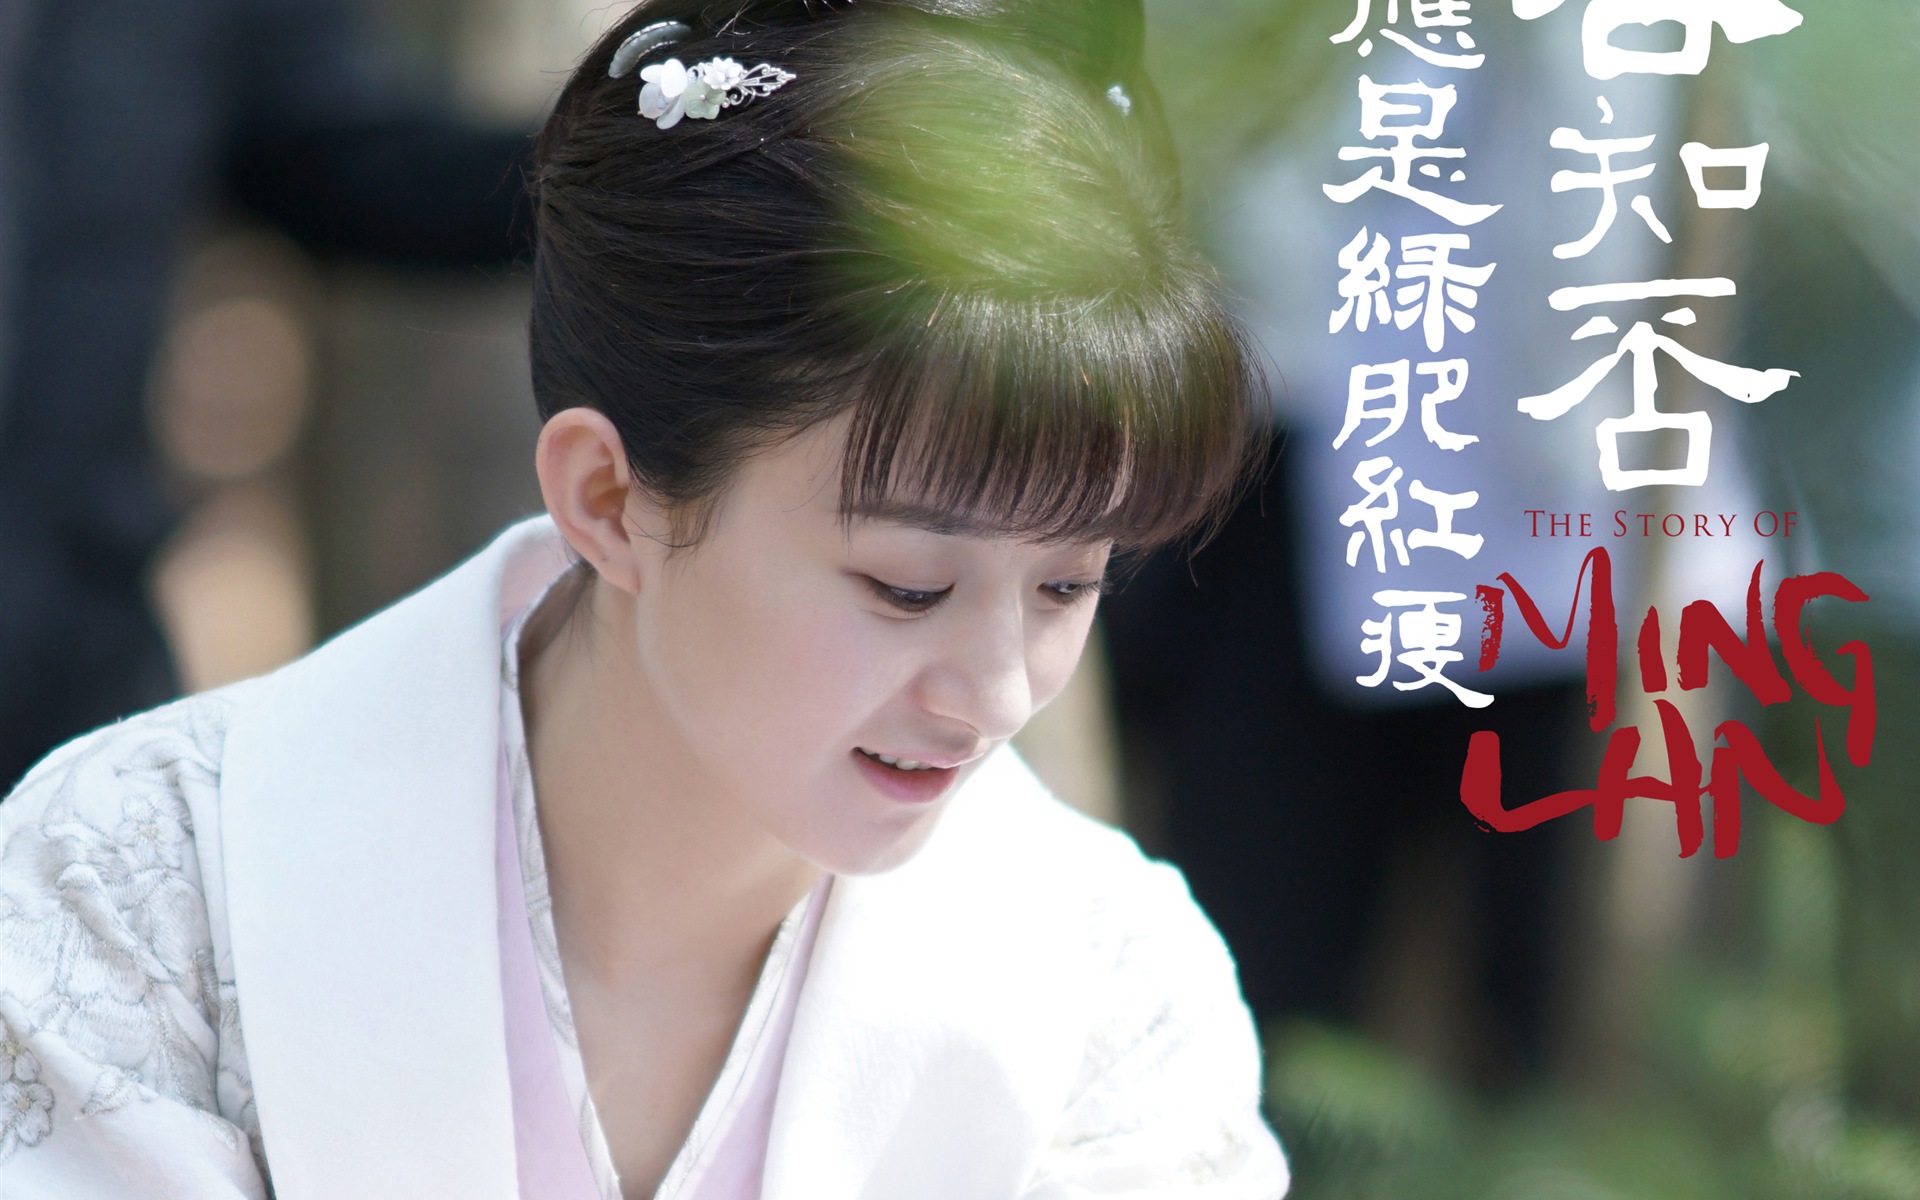 The Story Of MingLan, TV series HD wallpapers #27 - 1920x1200